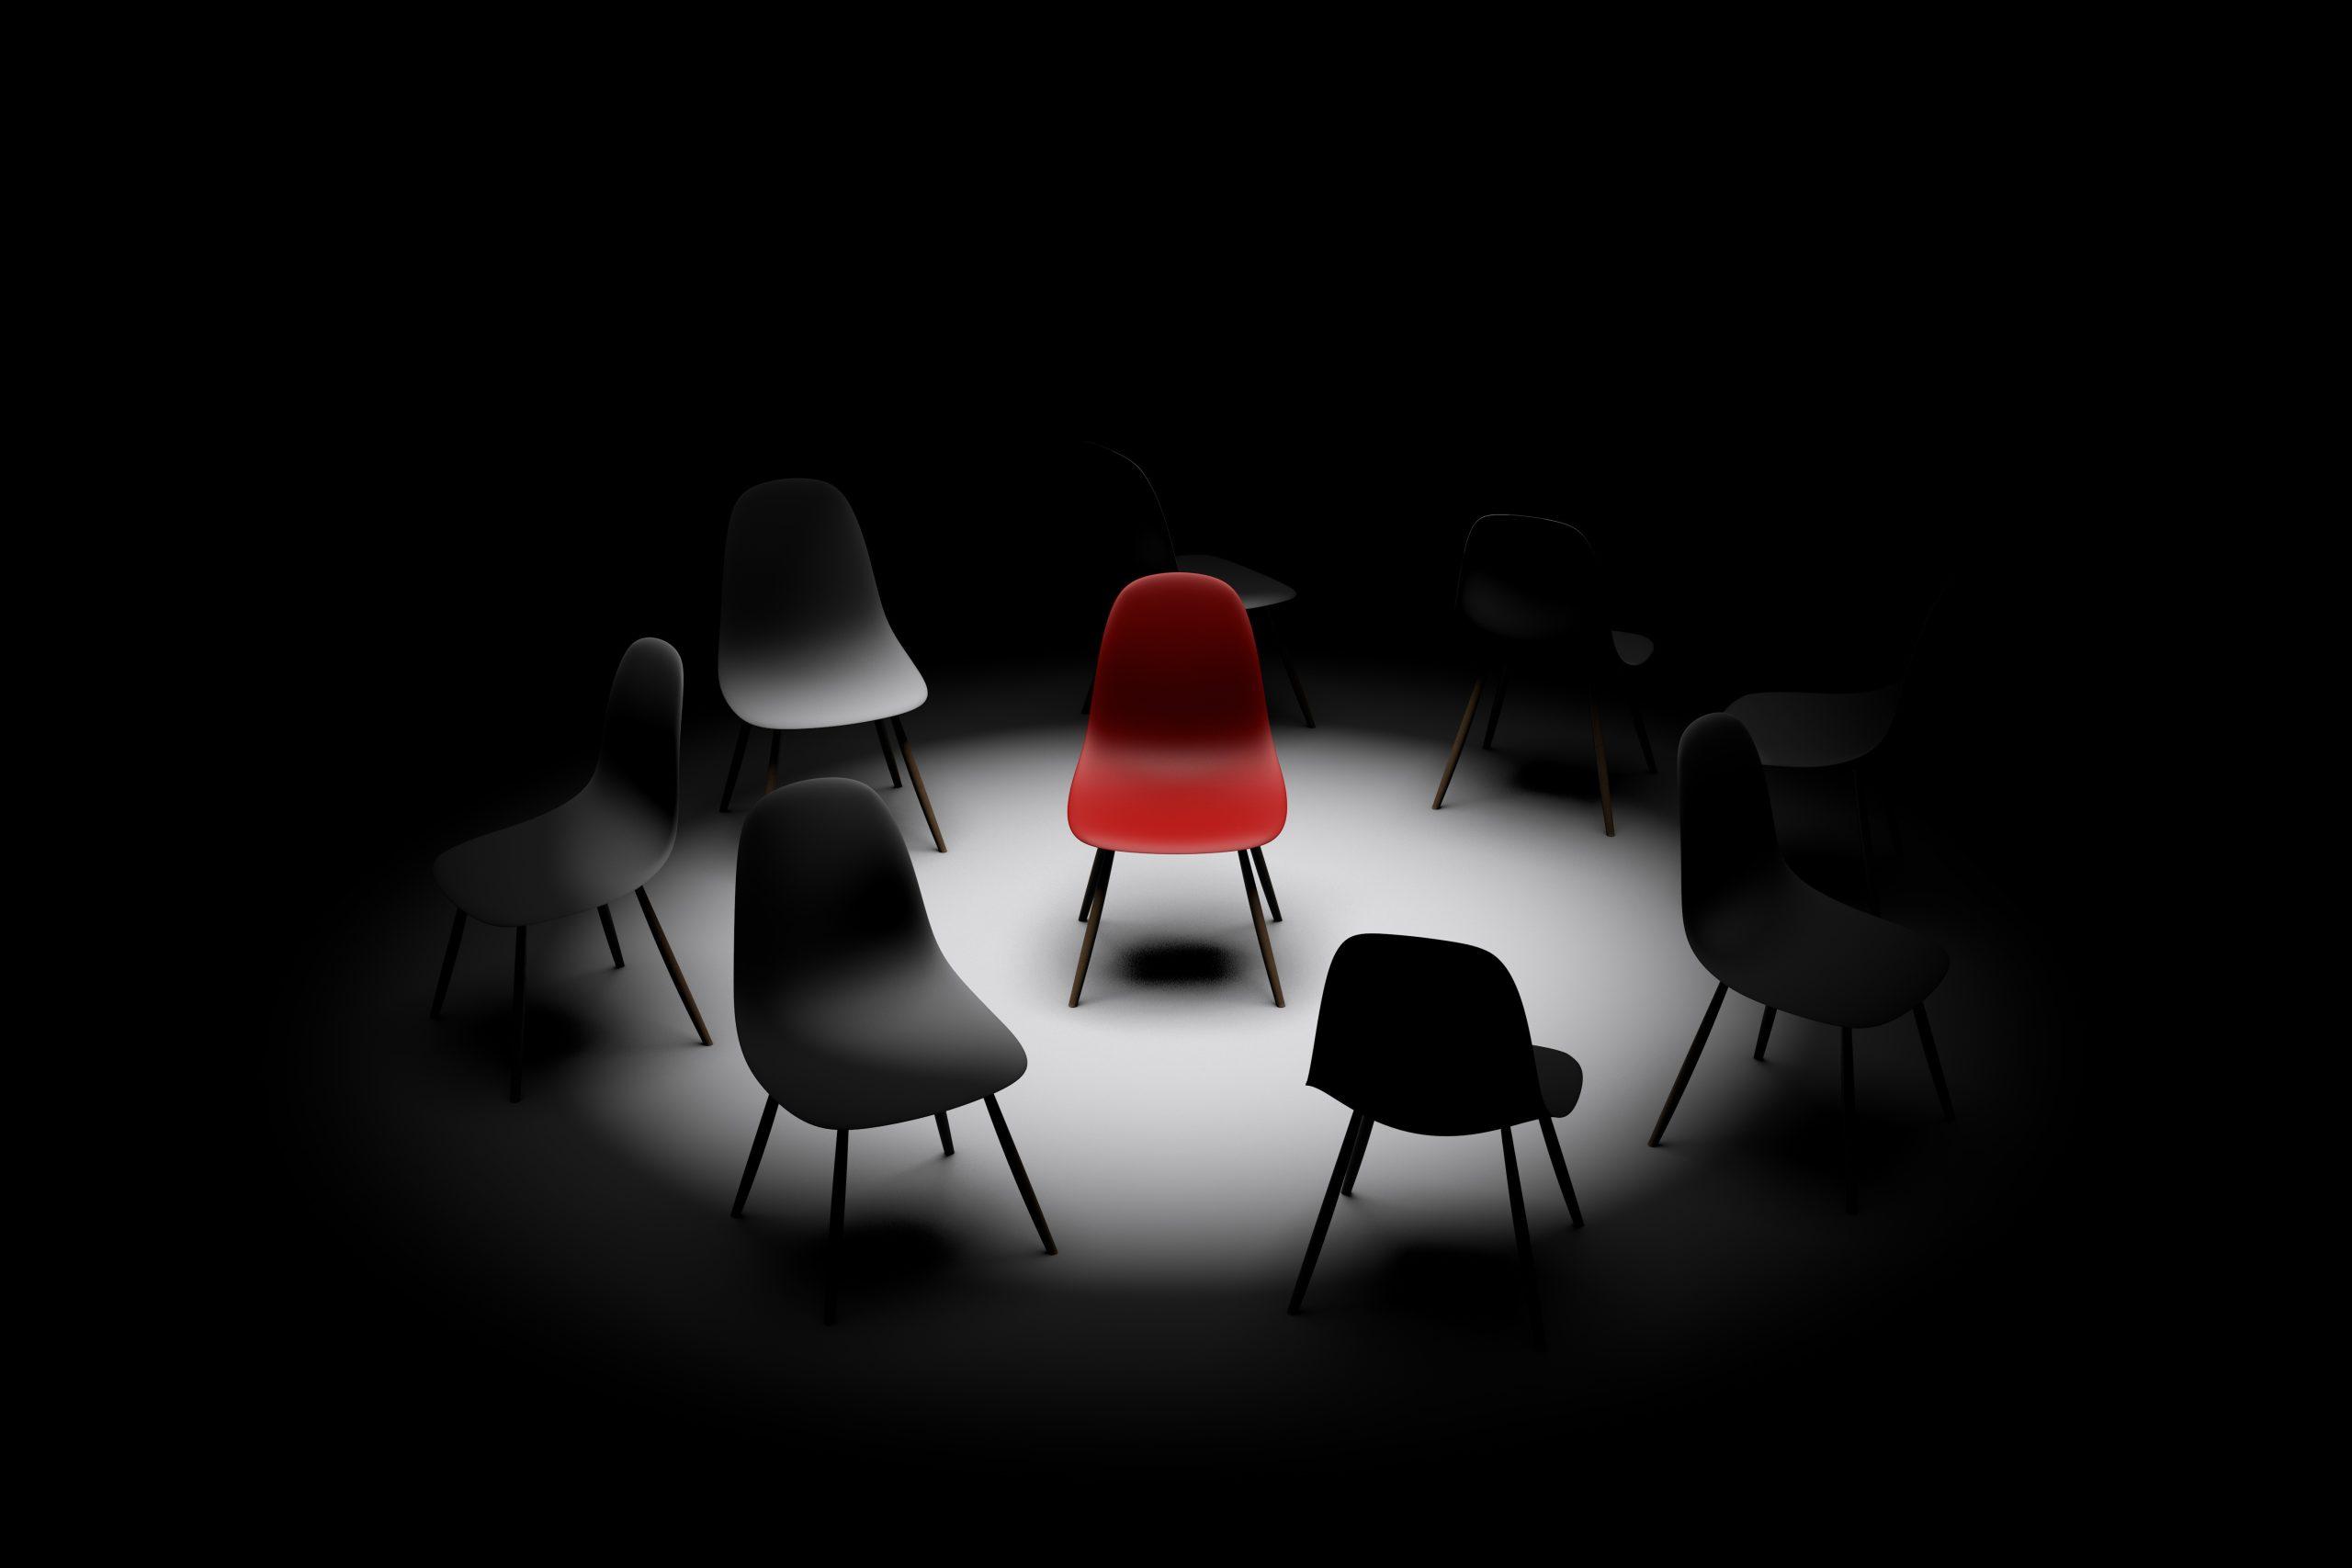 red chair under light surrounded by black chairs